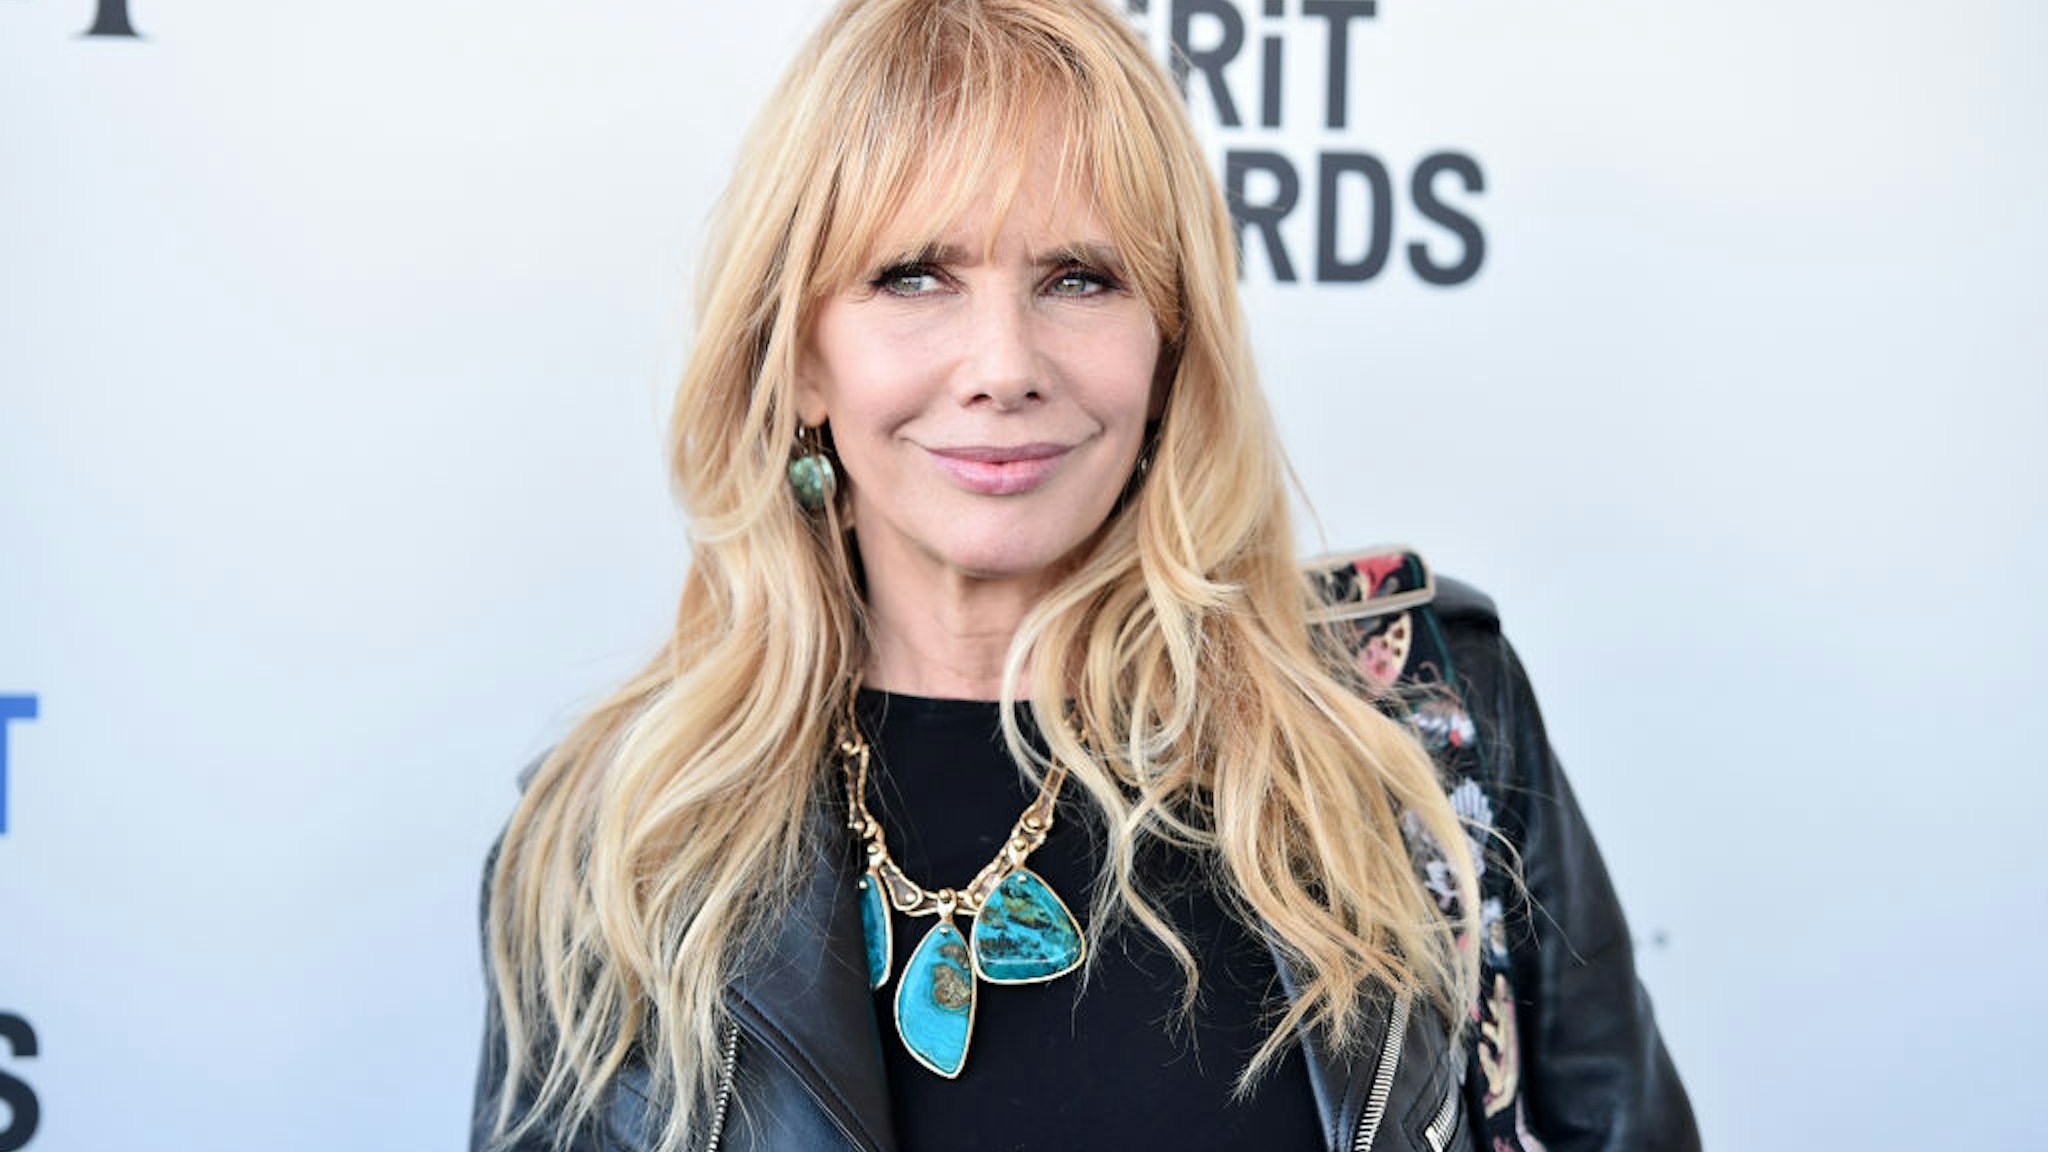 SANTA MONICA, CA - FEBRUARY 25: Actor Rosanna Arquette attends the 2017 Film Independent Spirit Awards at the Santa Monica Pier on February 25, 2017 in Santa Monica, California. (Photo by Alberto E. Rodriguez/Getty Images)